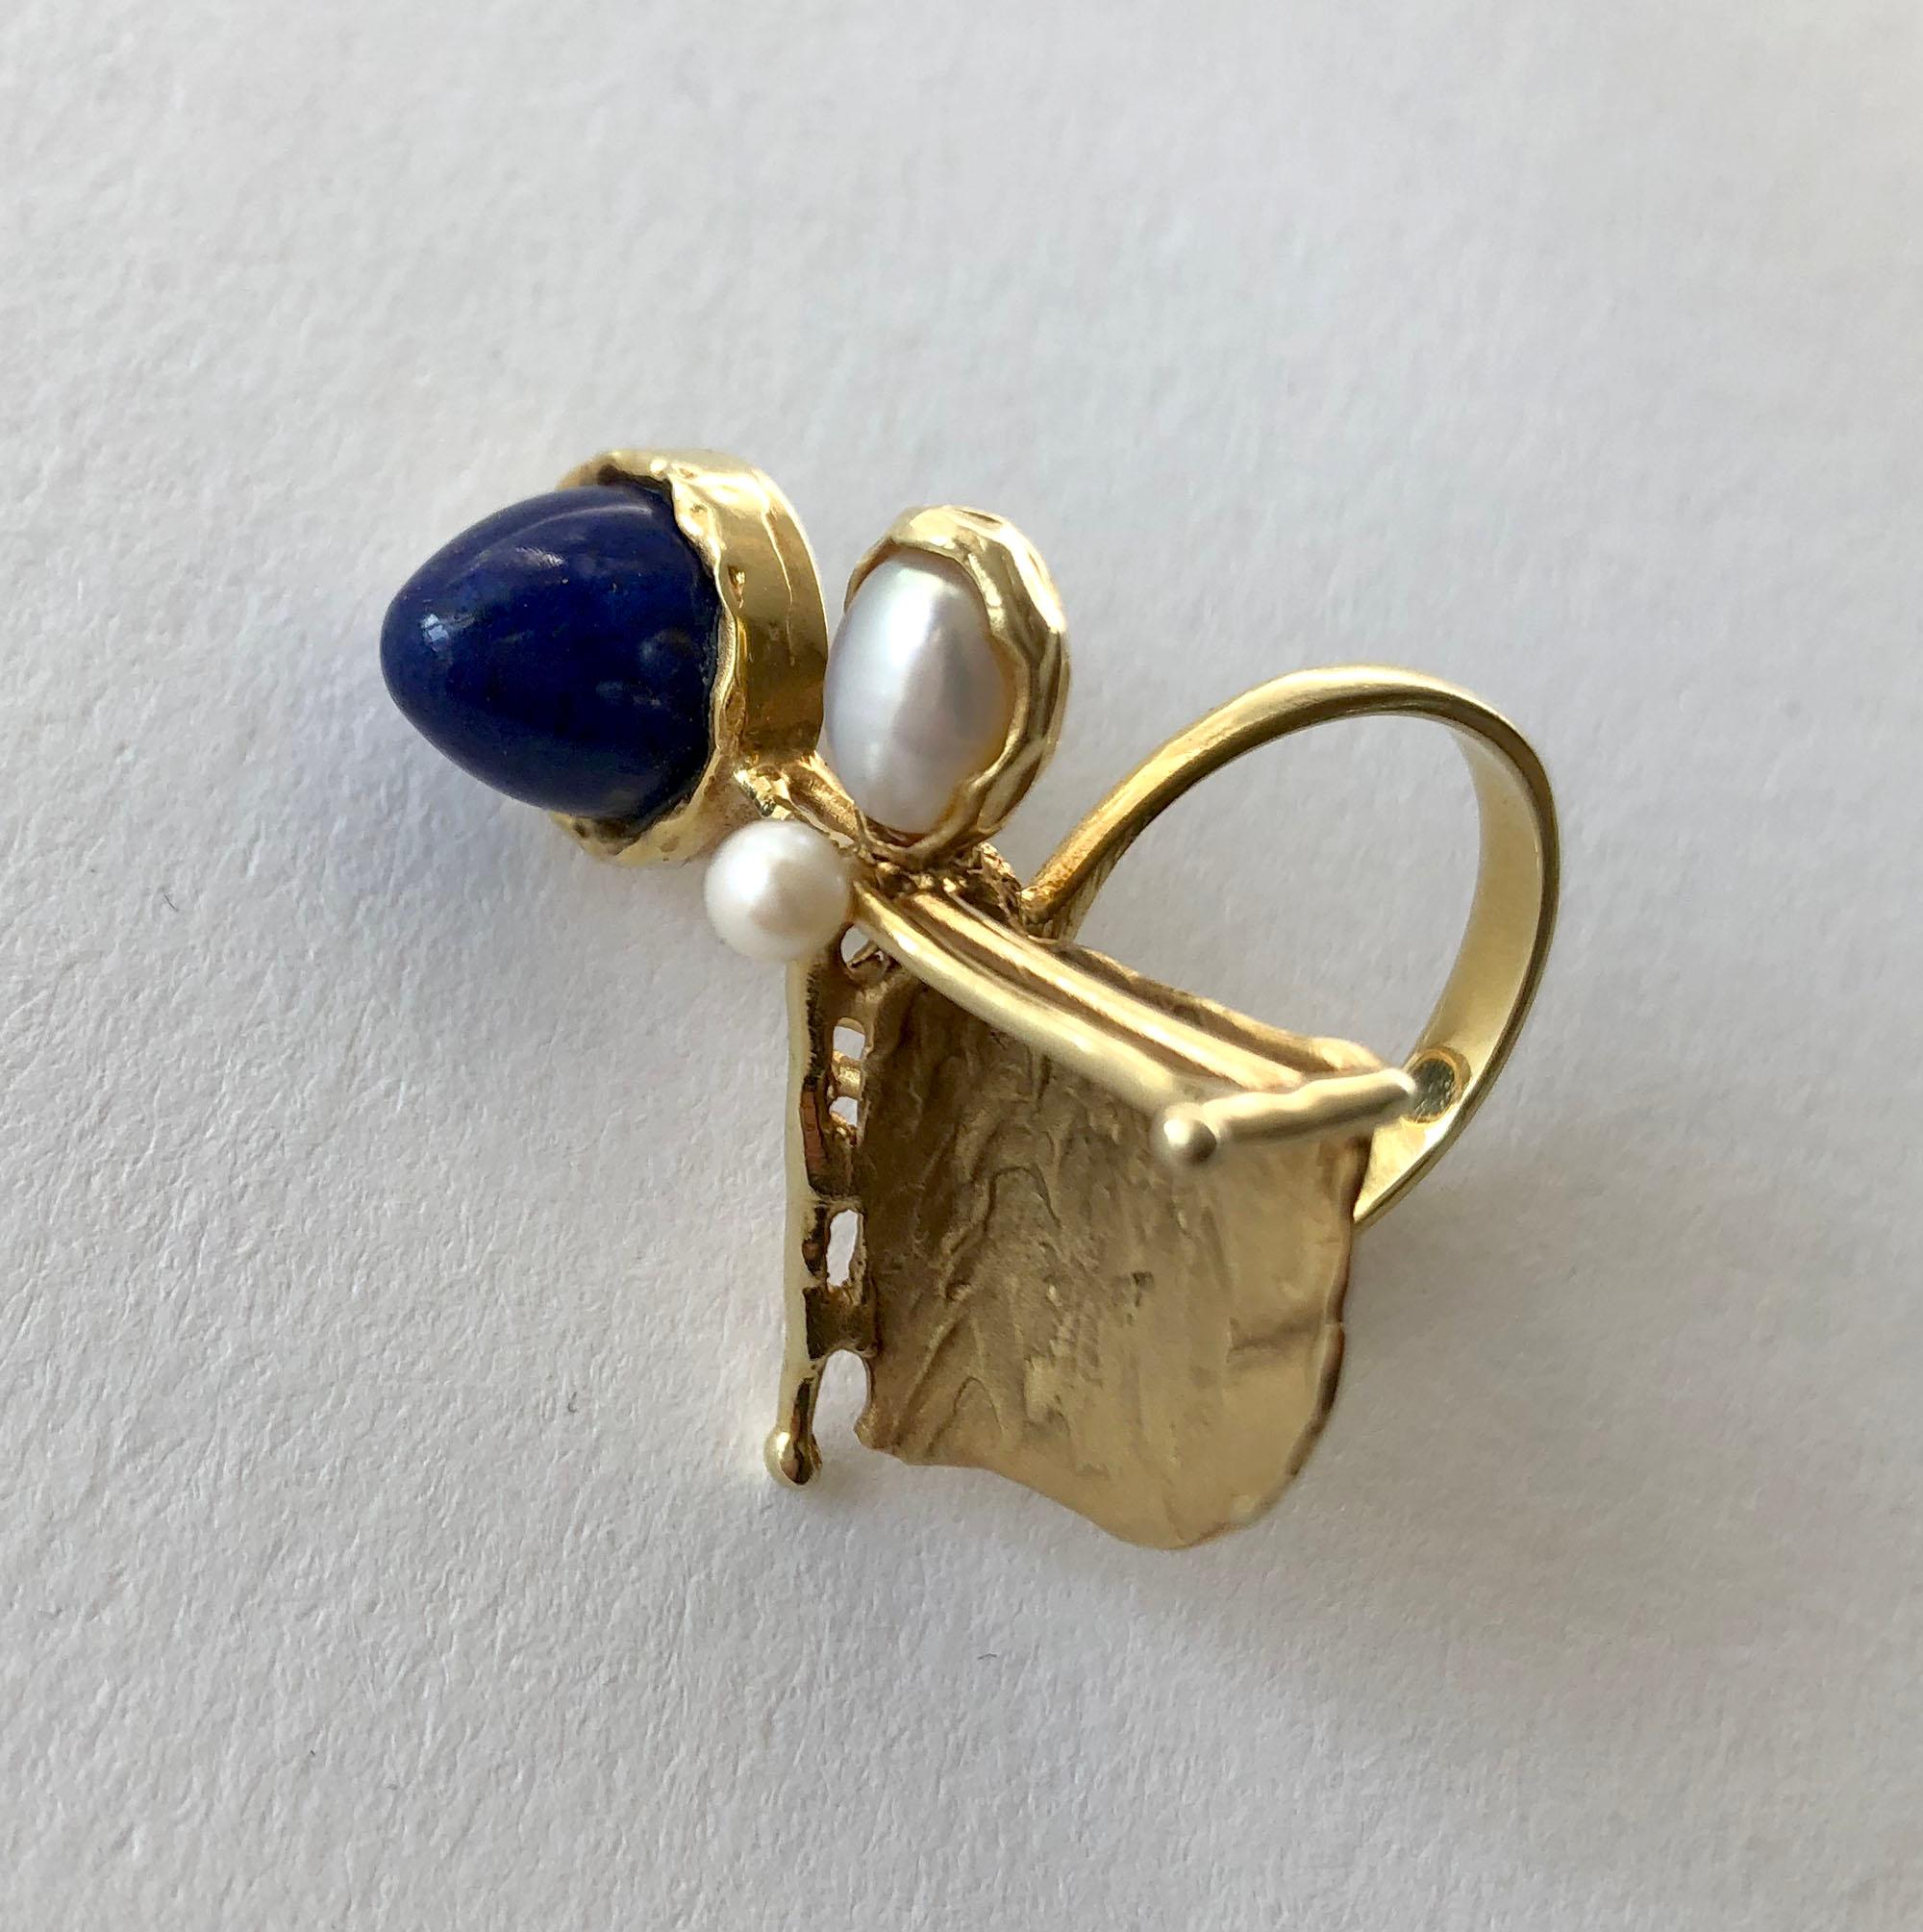 1950's European modernist 14ct gold ring featuring a conical cut bezel set lapis lazuli with mabé grey pearl accent.  Ring is a finger size 7.5 and is signed 14 ct.  In very good vintage 1950s condition.  8.7 grams.